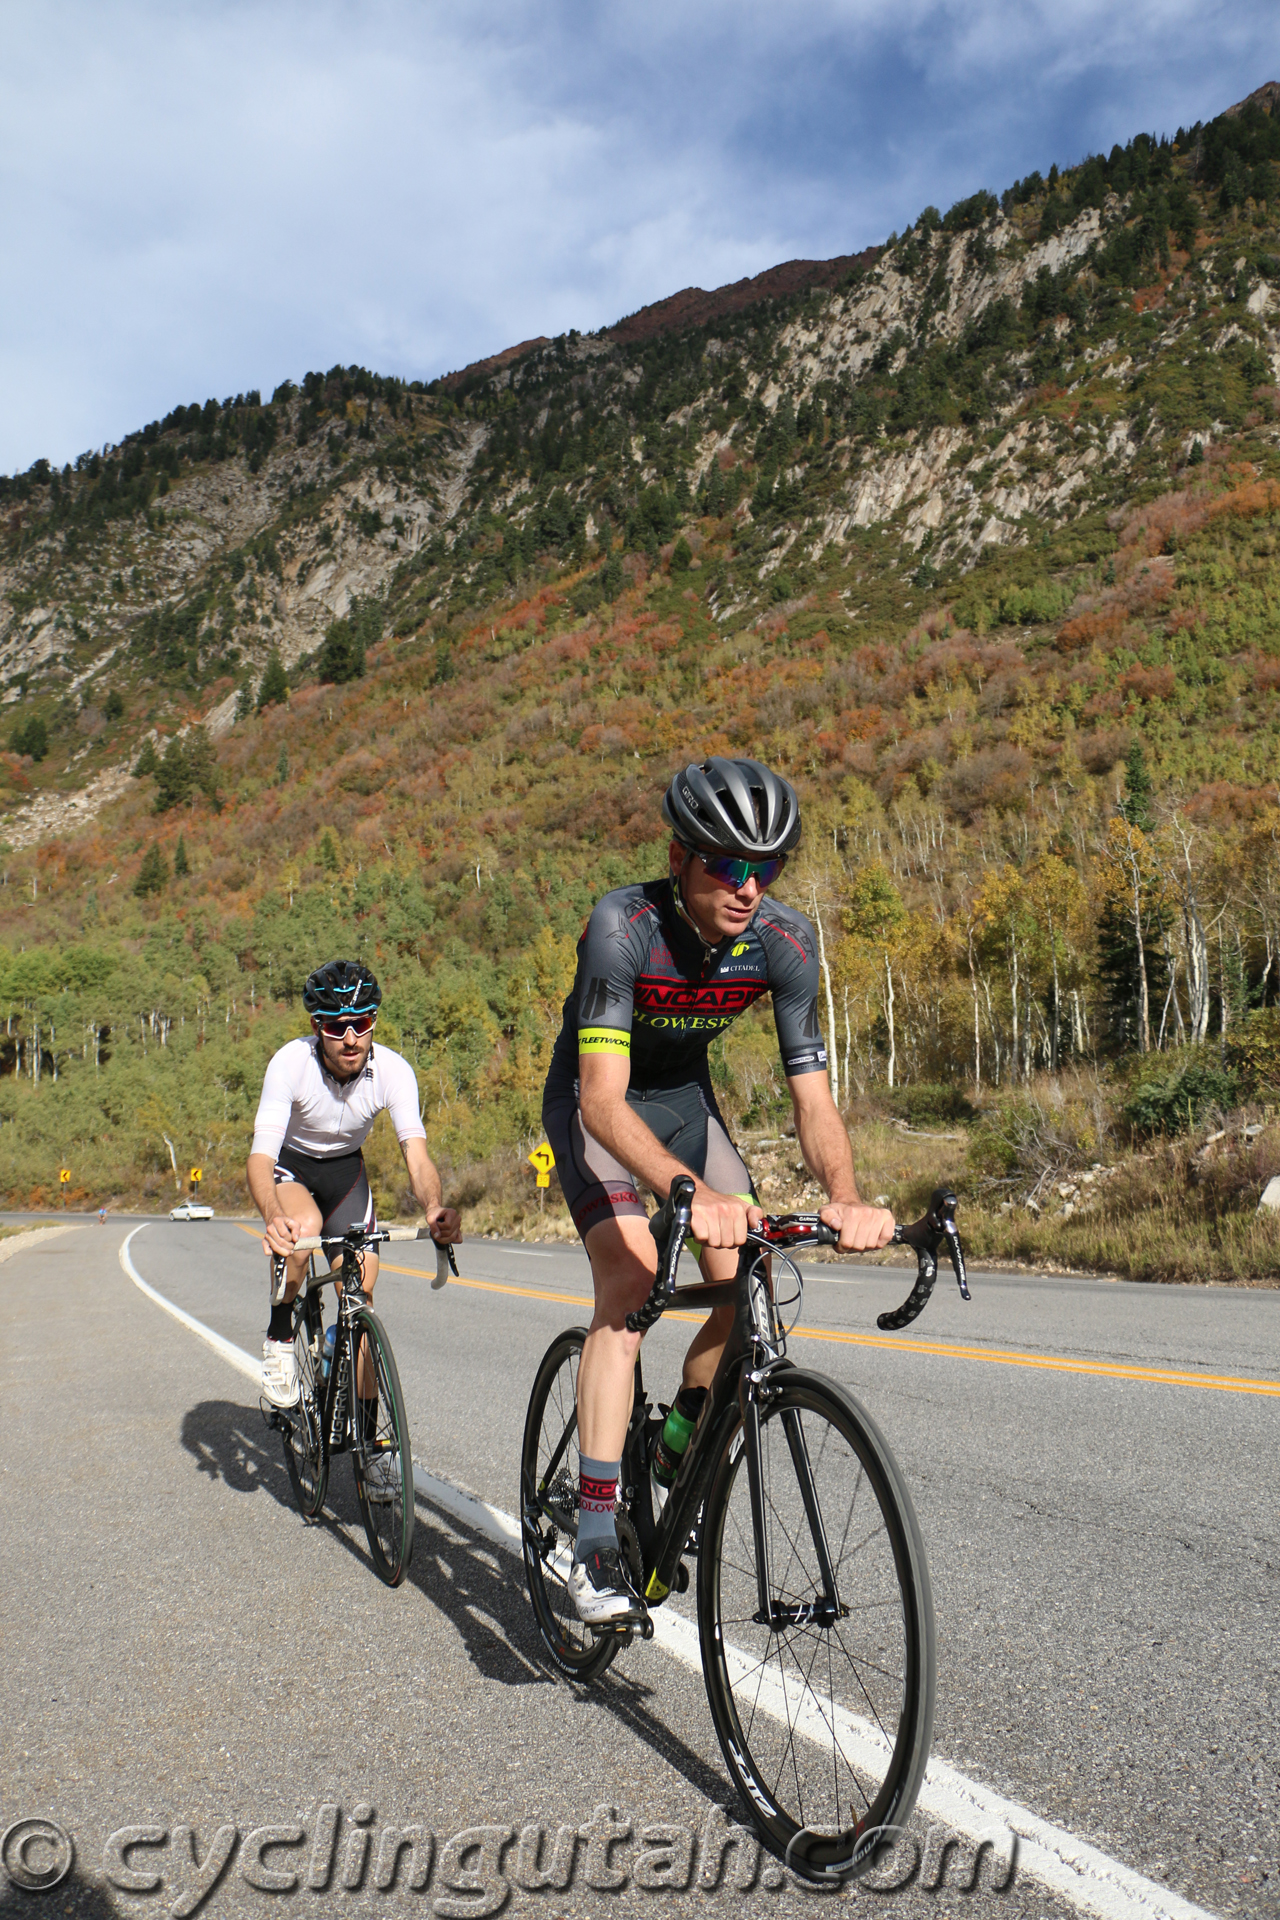 Squire and Kofman Climb to Victory in 2015 Snowbird Hill Climb and Ultra Hill Climb; Report, Results, Photos, Video